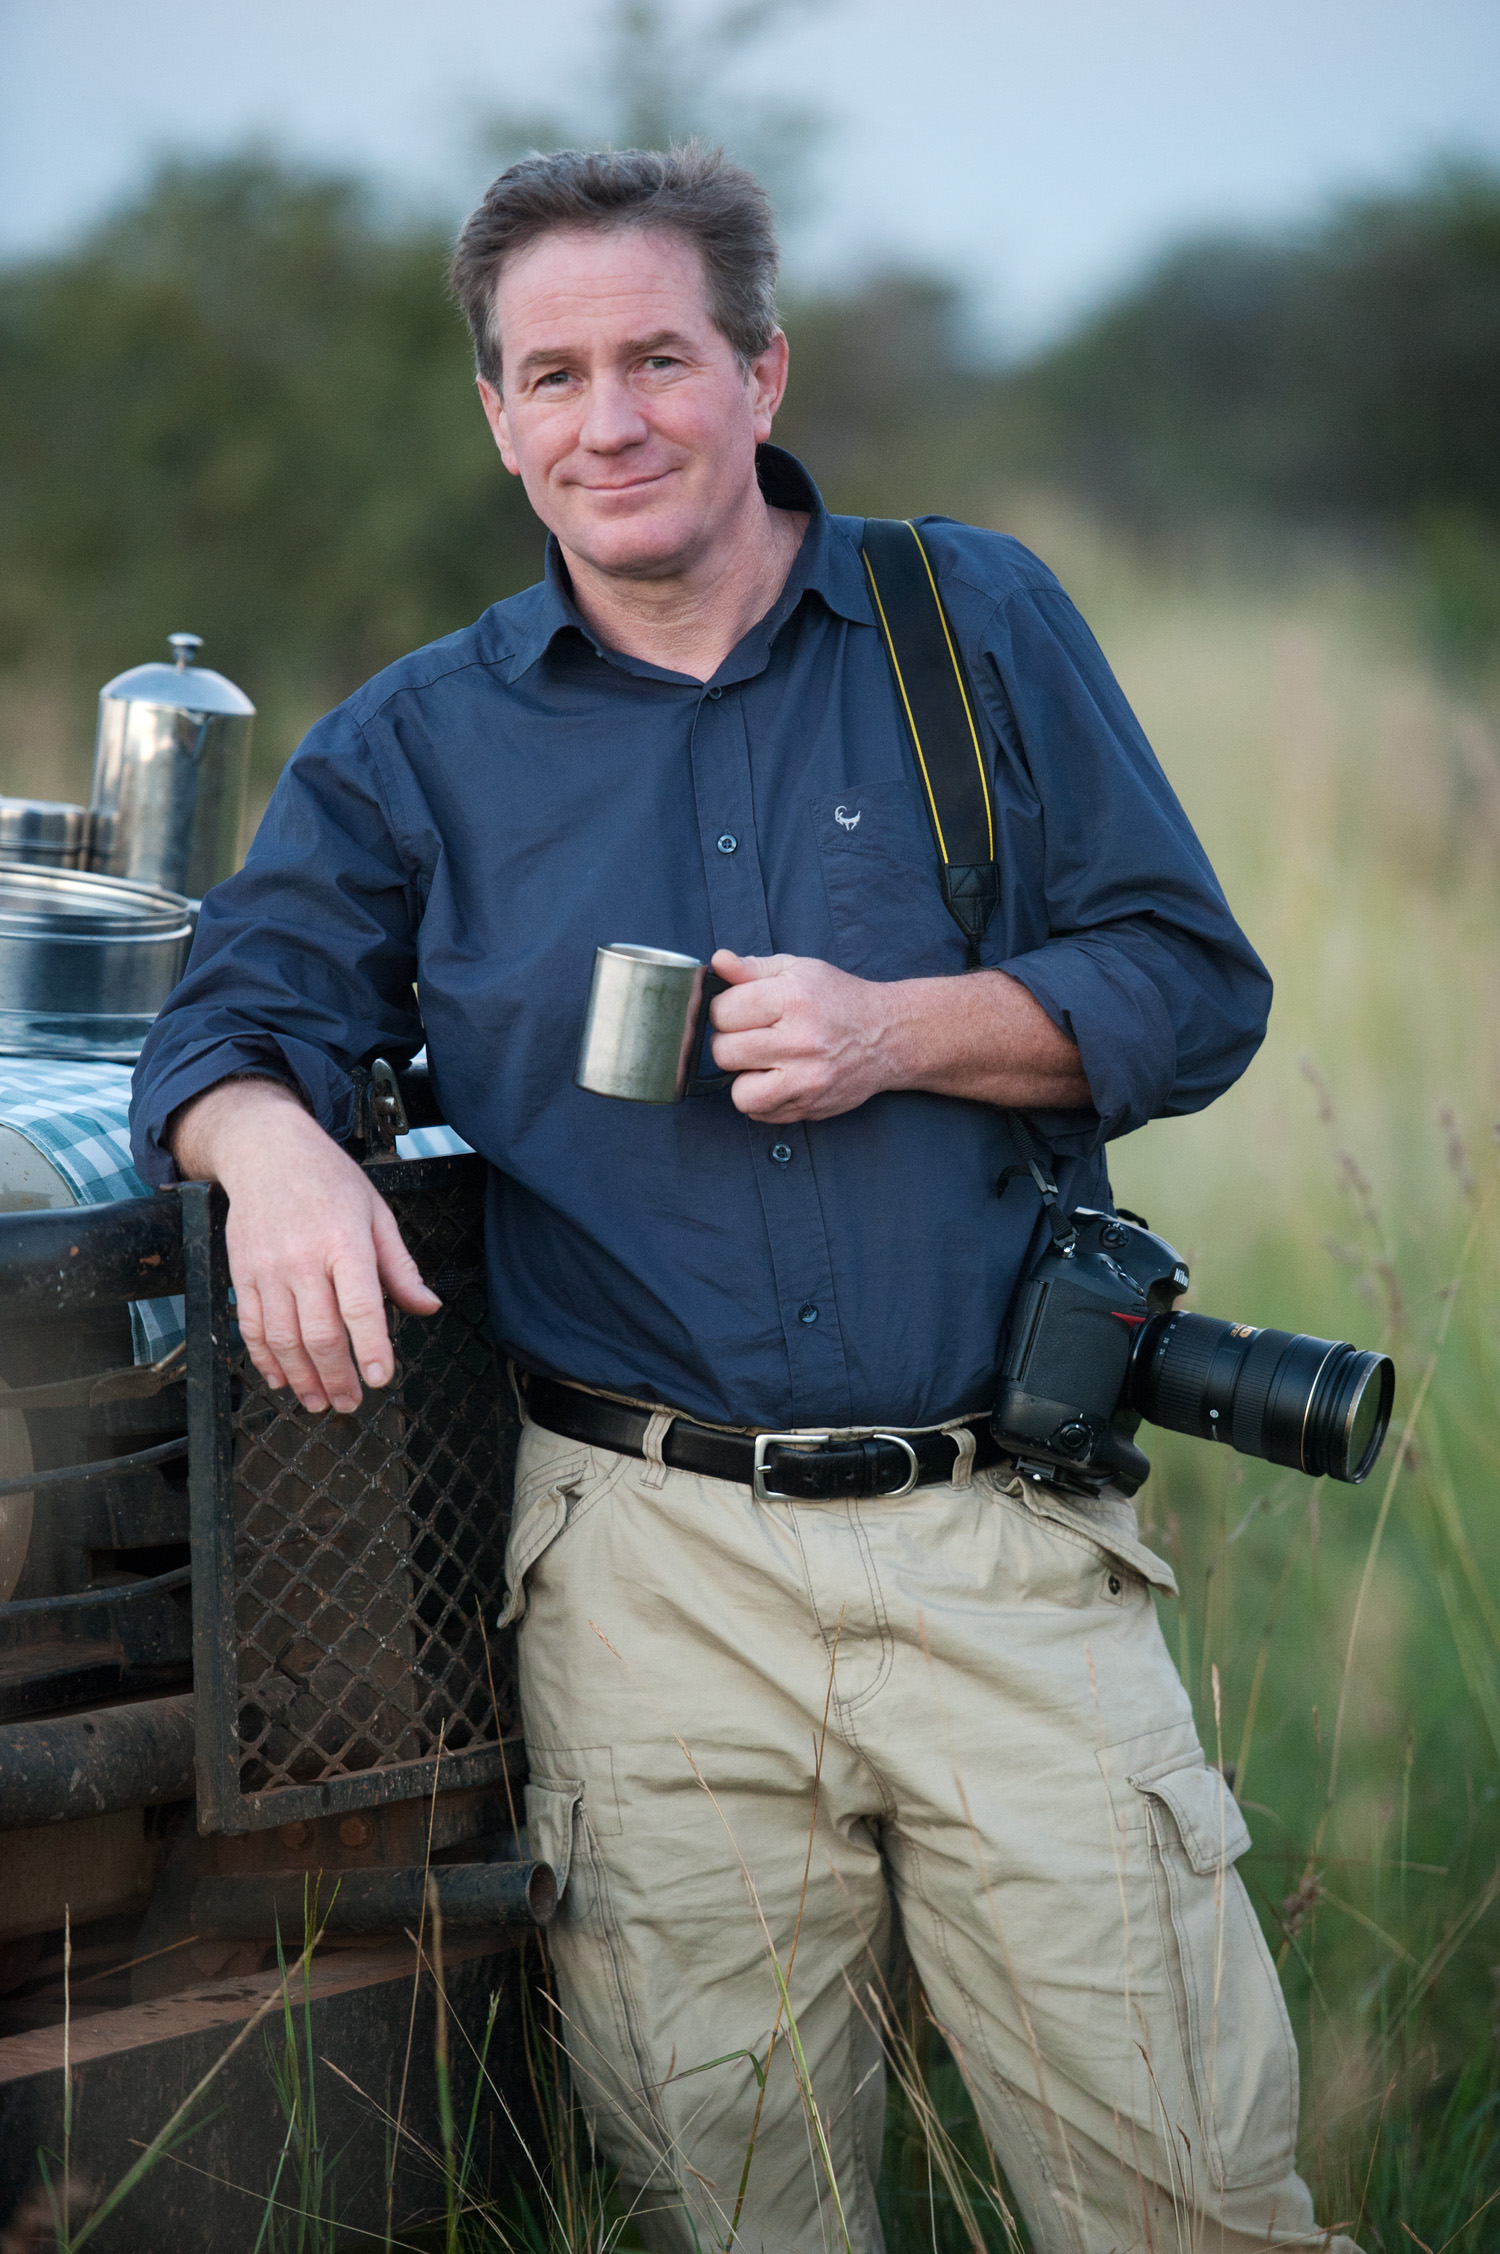 National Geographic photographer Joel Sartore is one of the judges for Art4Apes.com